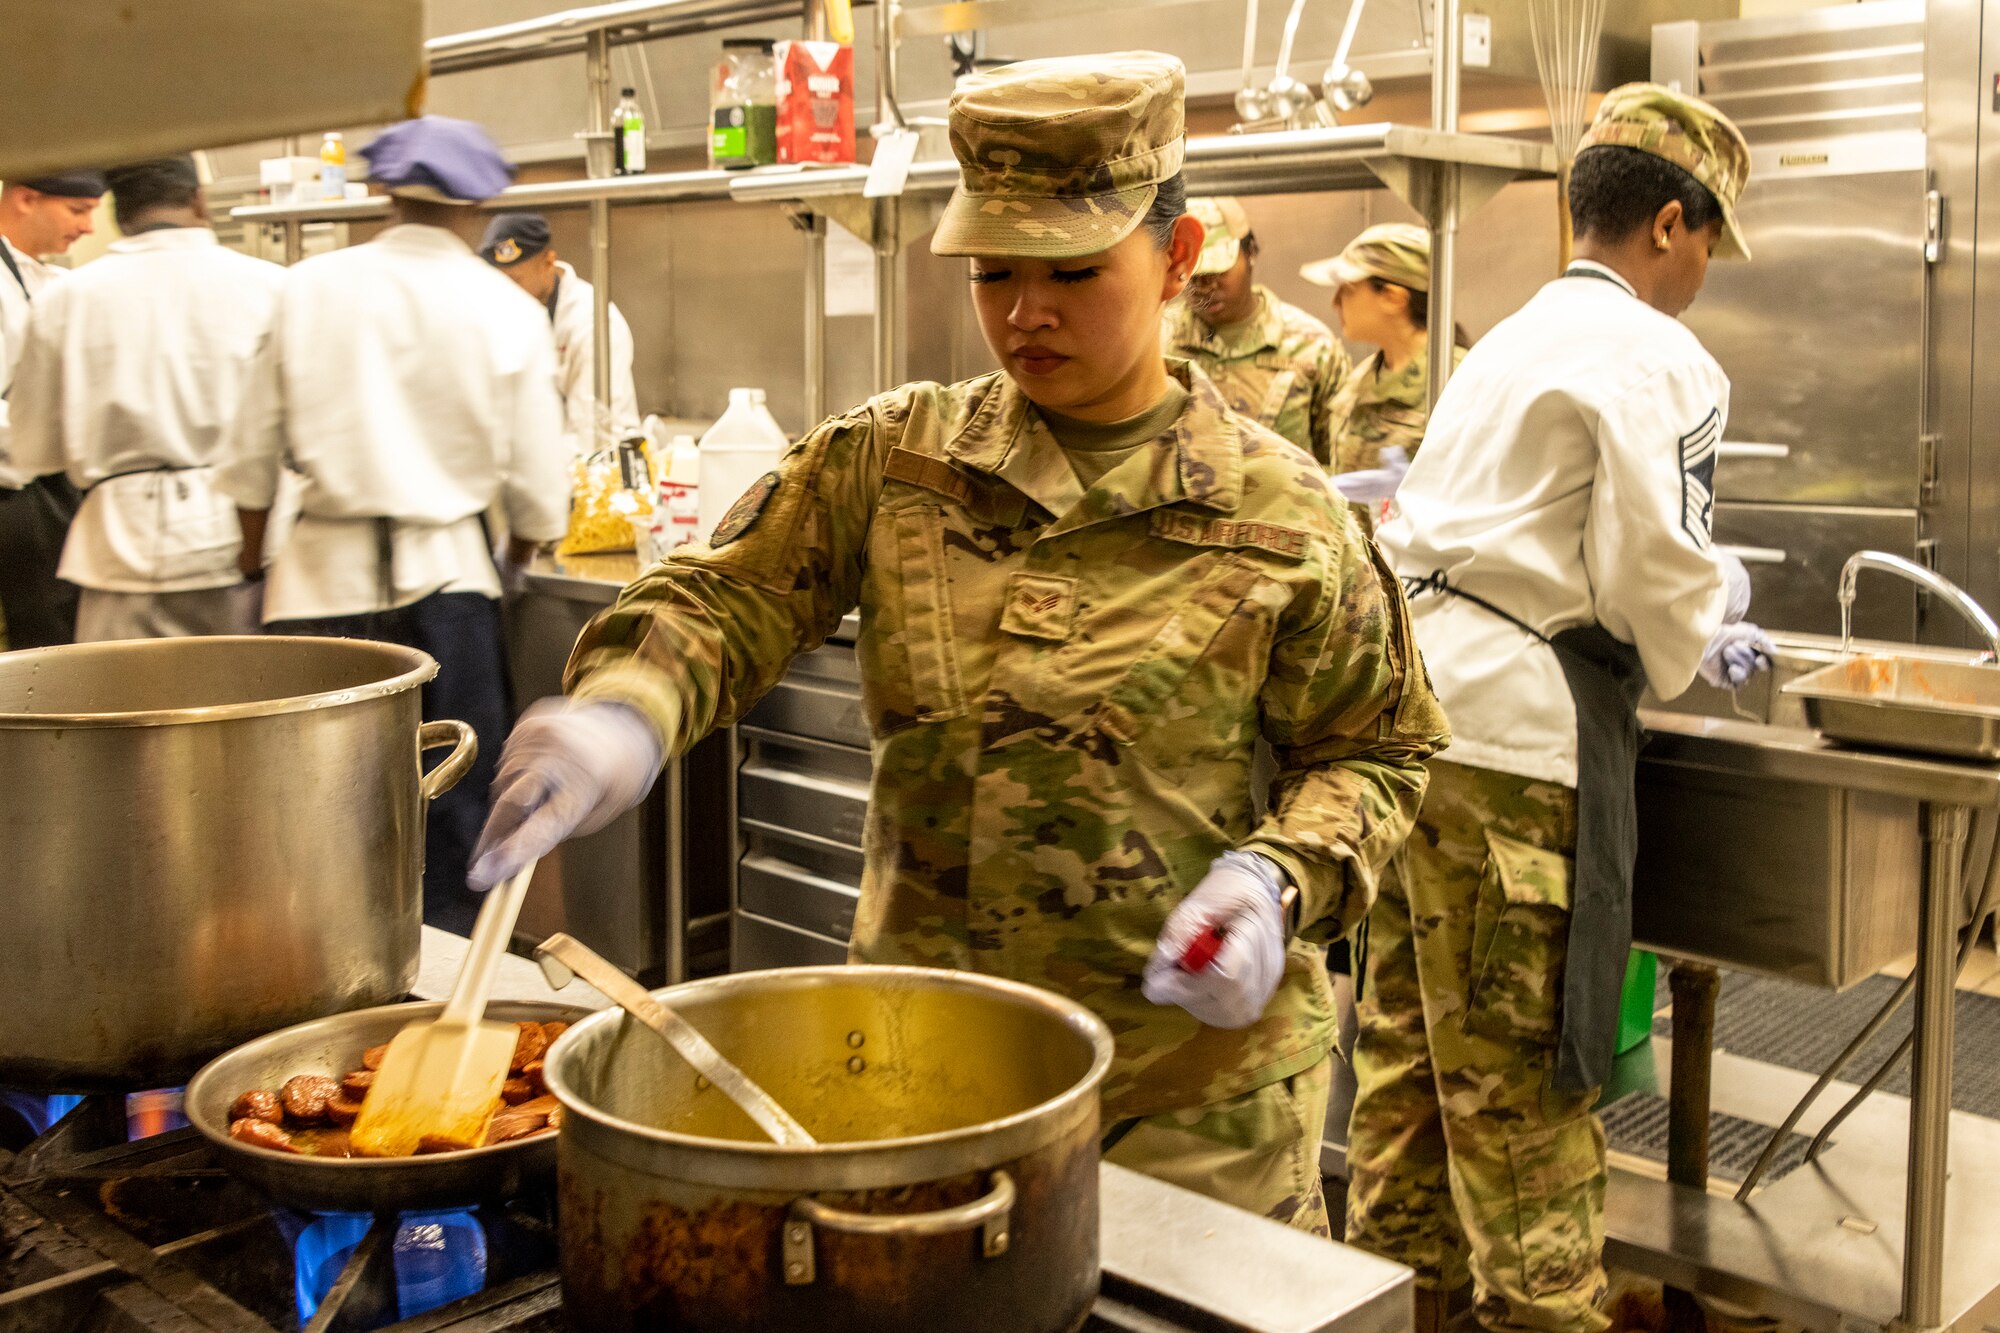 U.S. Air Force Airman 1st Class Cynthia Li, 60th Force Support Squadron food service journeyman, fries up sausage during a chopped competition at Travis Air Force Base, California, March 23, 2022. The 60th Mission Support Group Monarch Dining Facility hosted a cooking competition showcasing skill, speed and ingenuity. Teams of four competed to transform mystery ingredients into the main course and dessert dishes to present to a panel of judges. (U.S. Air Force photo by Heide Couch)